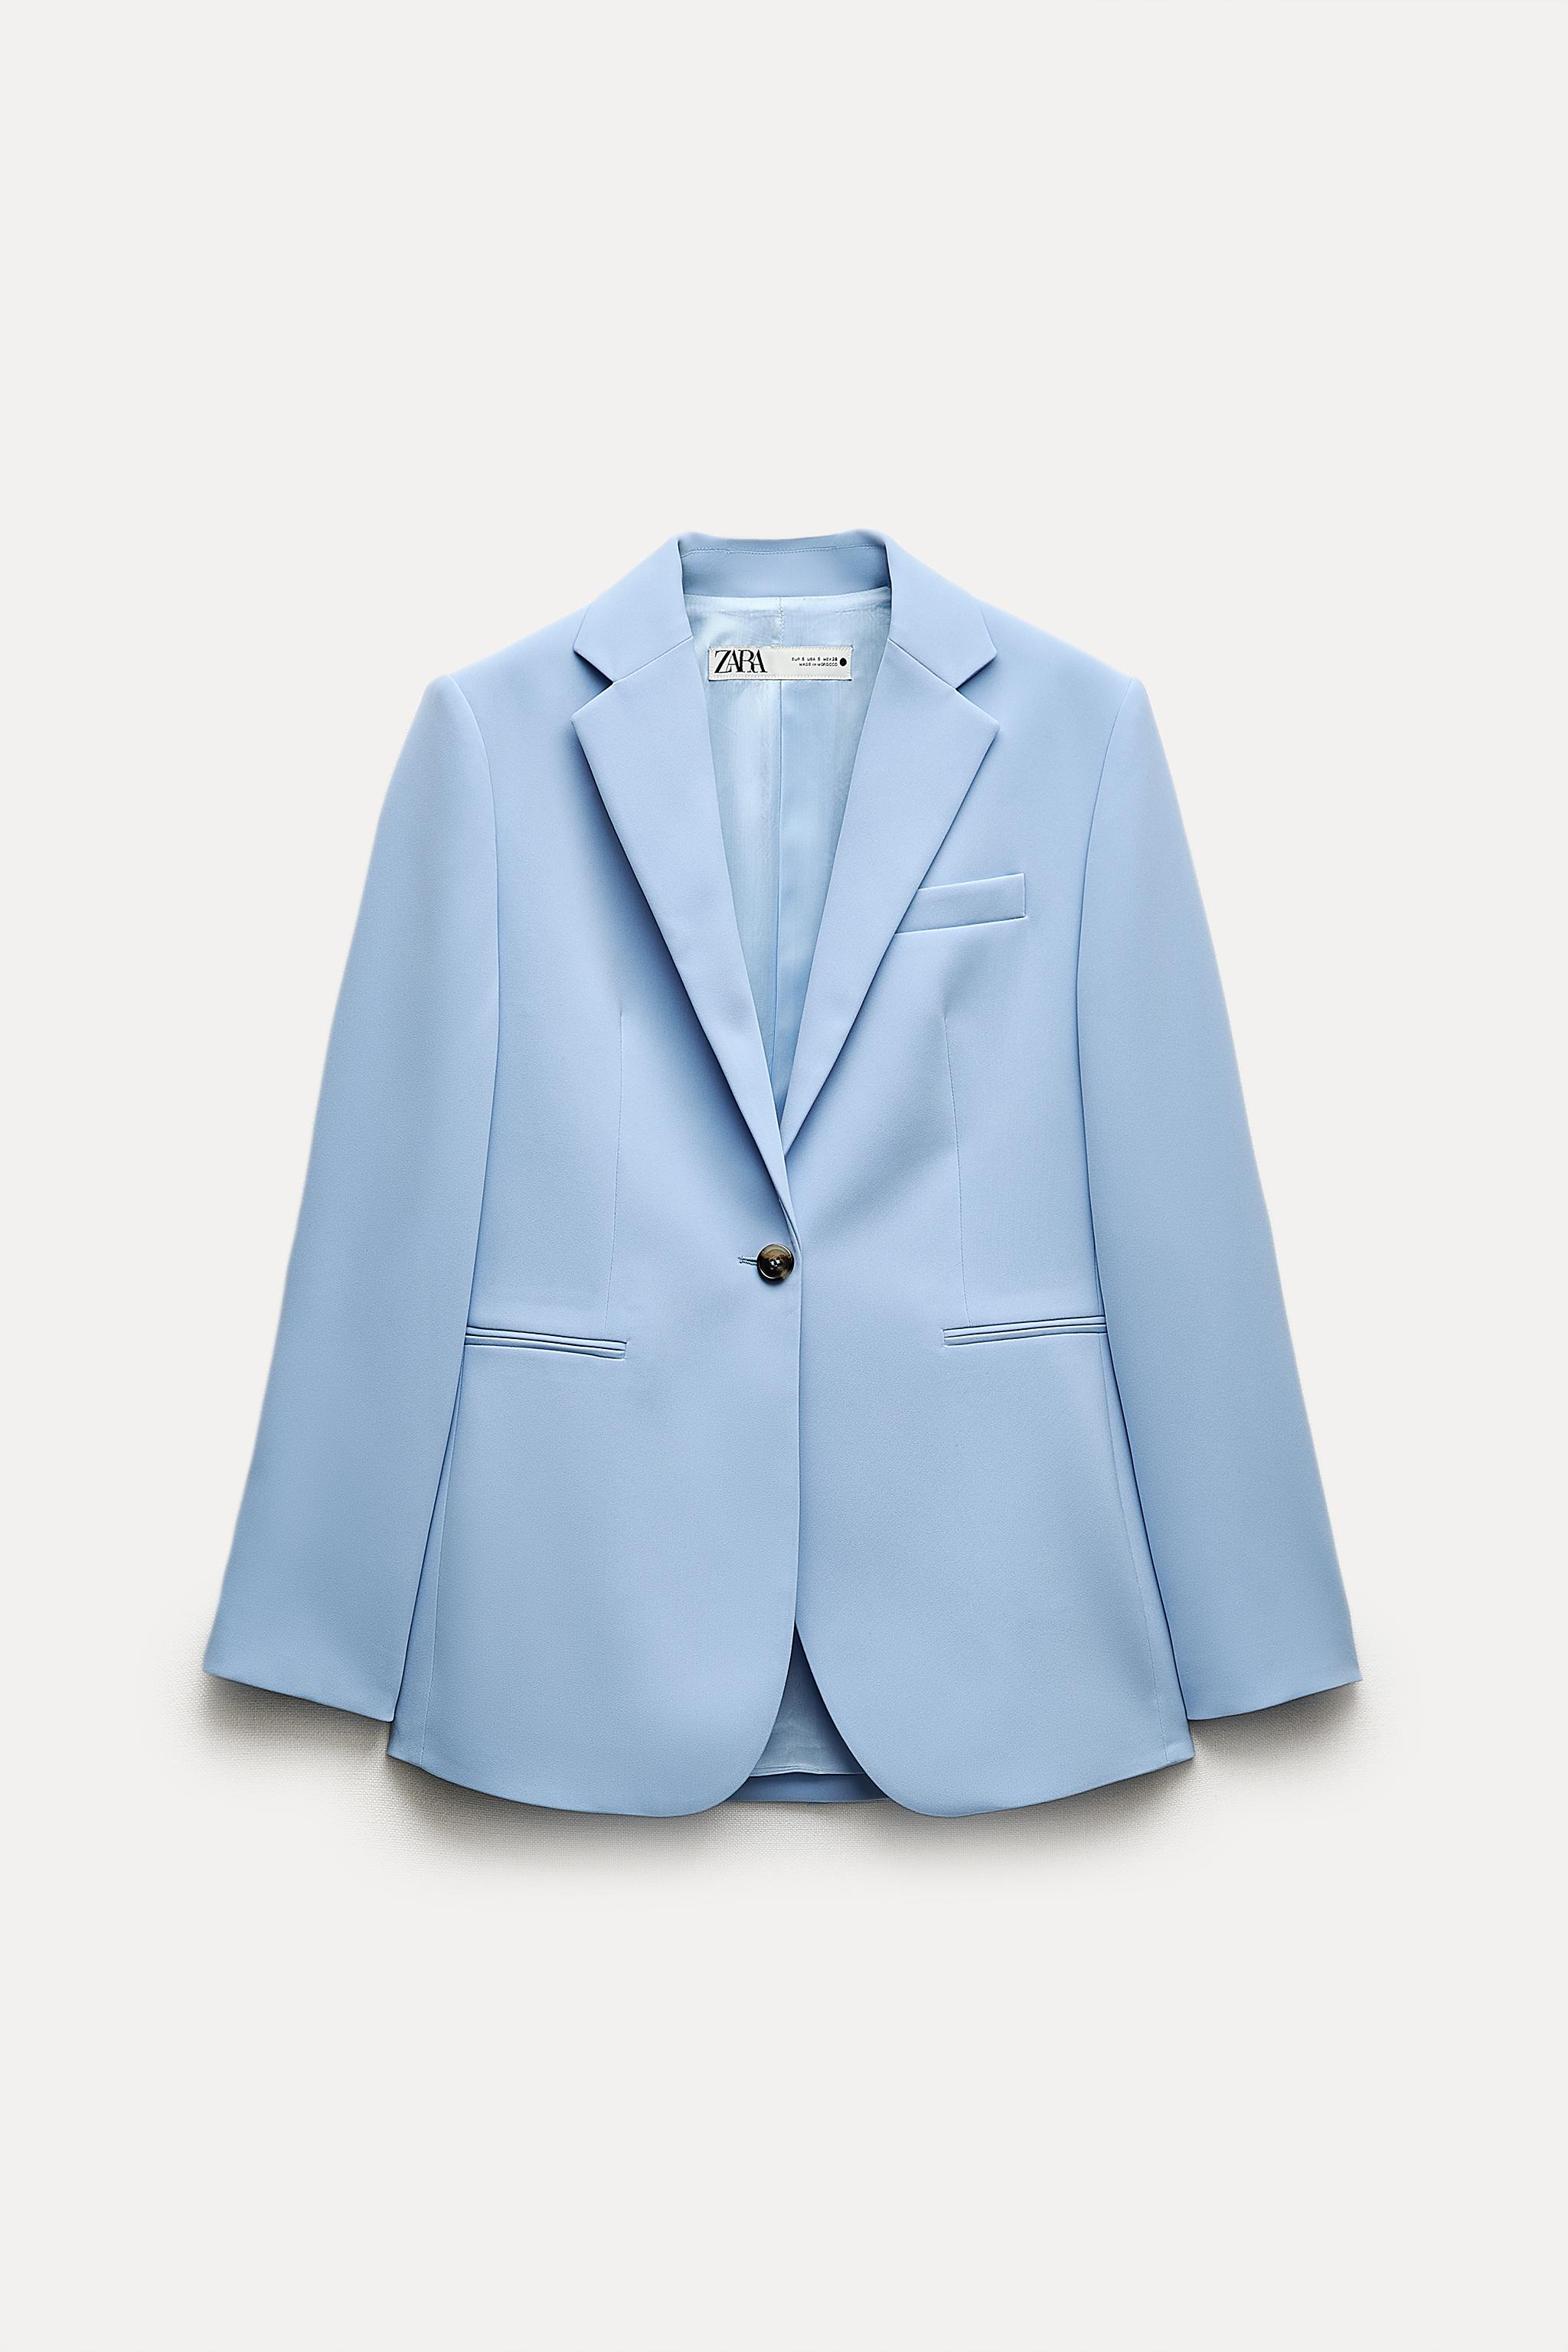 ZW COLLECTION STRAIGHT CUT JACKET - Light blue